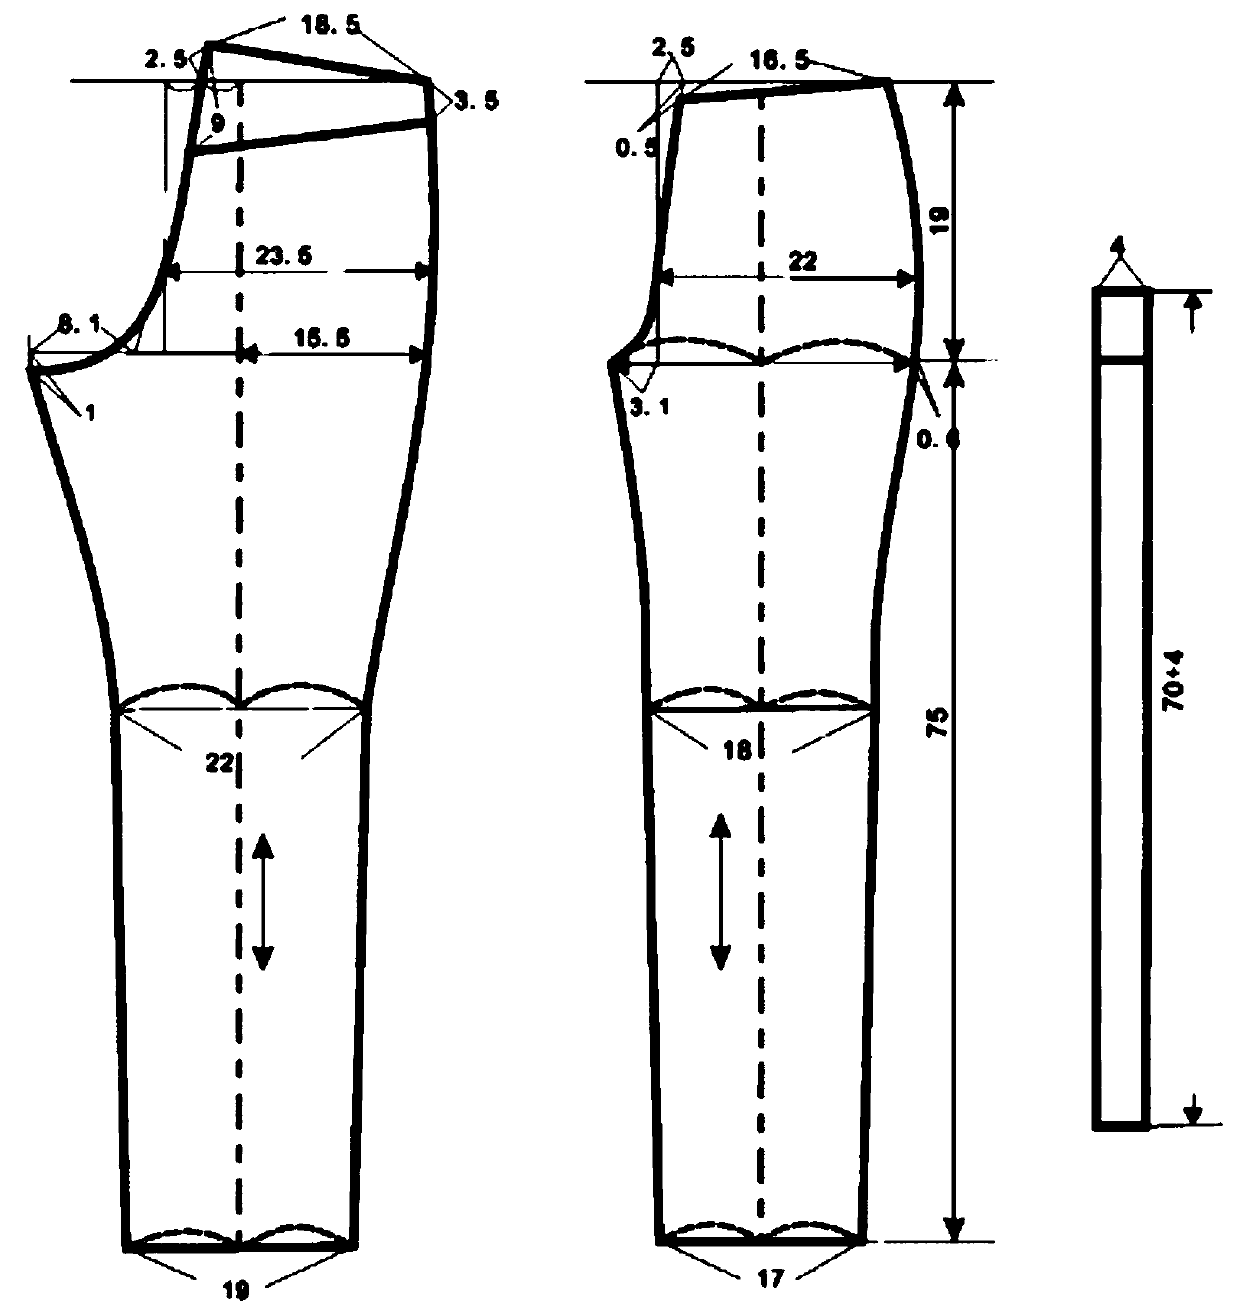 Manufacturing method of occupational trouser templates suitable for production activities